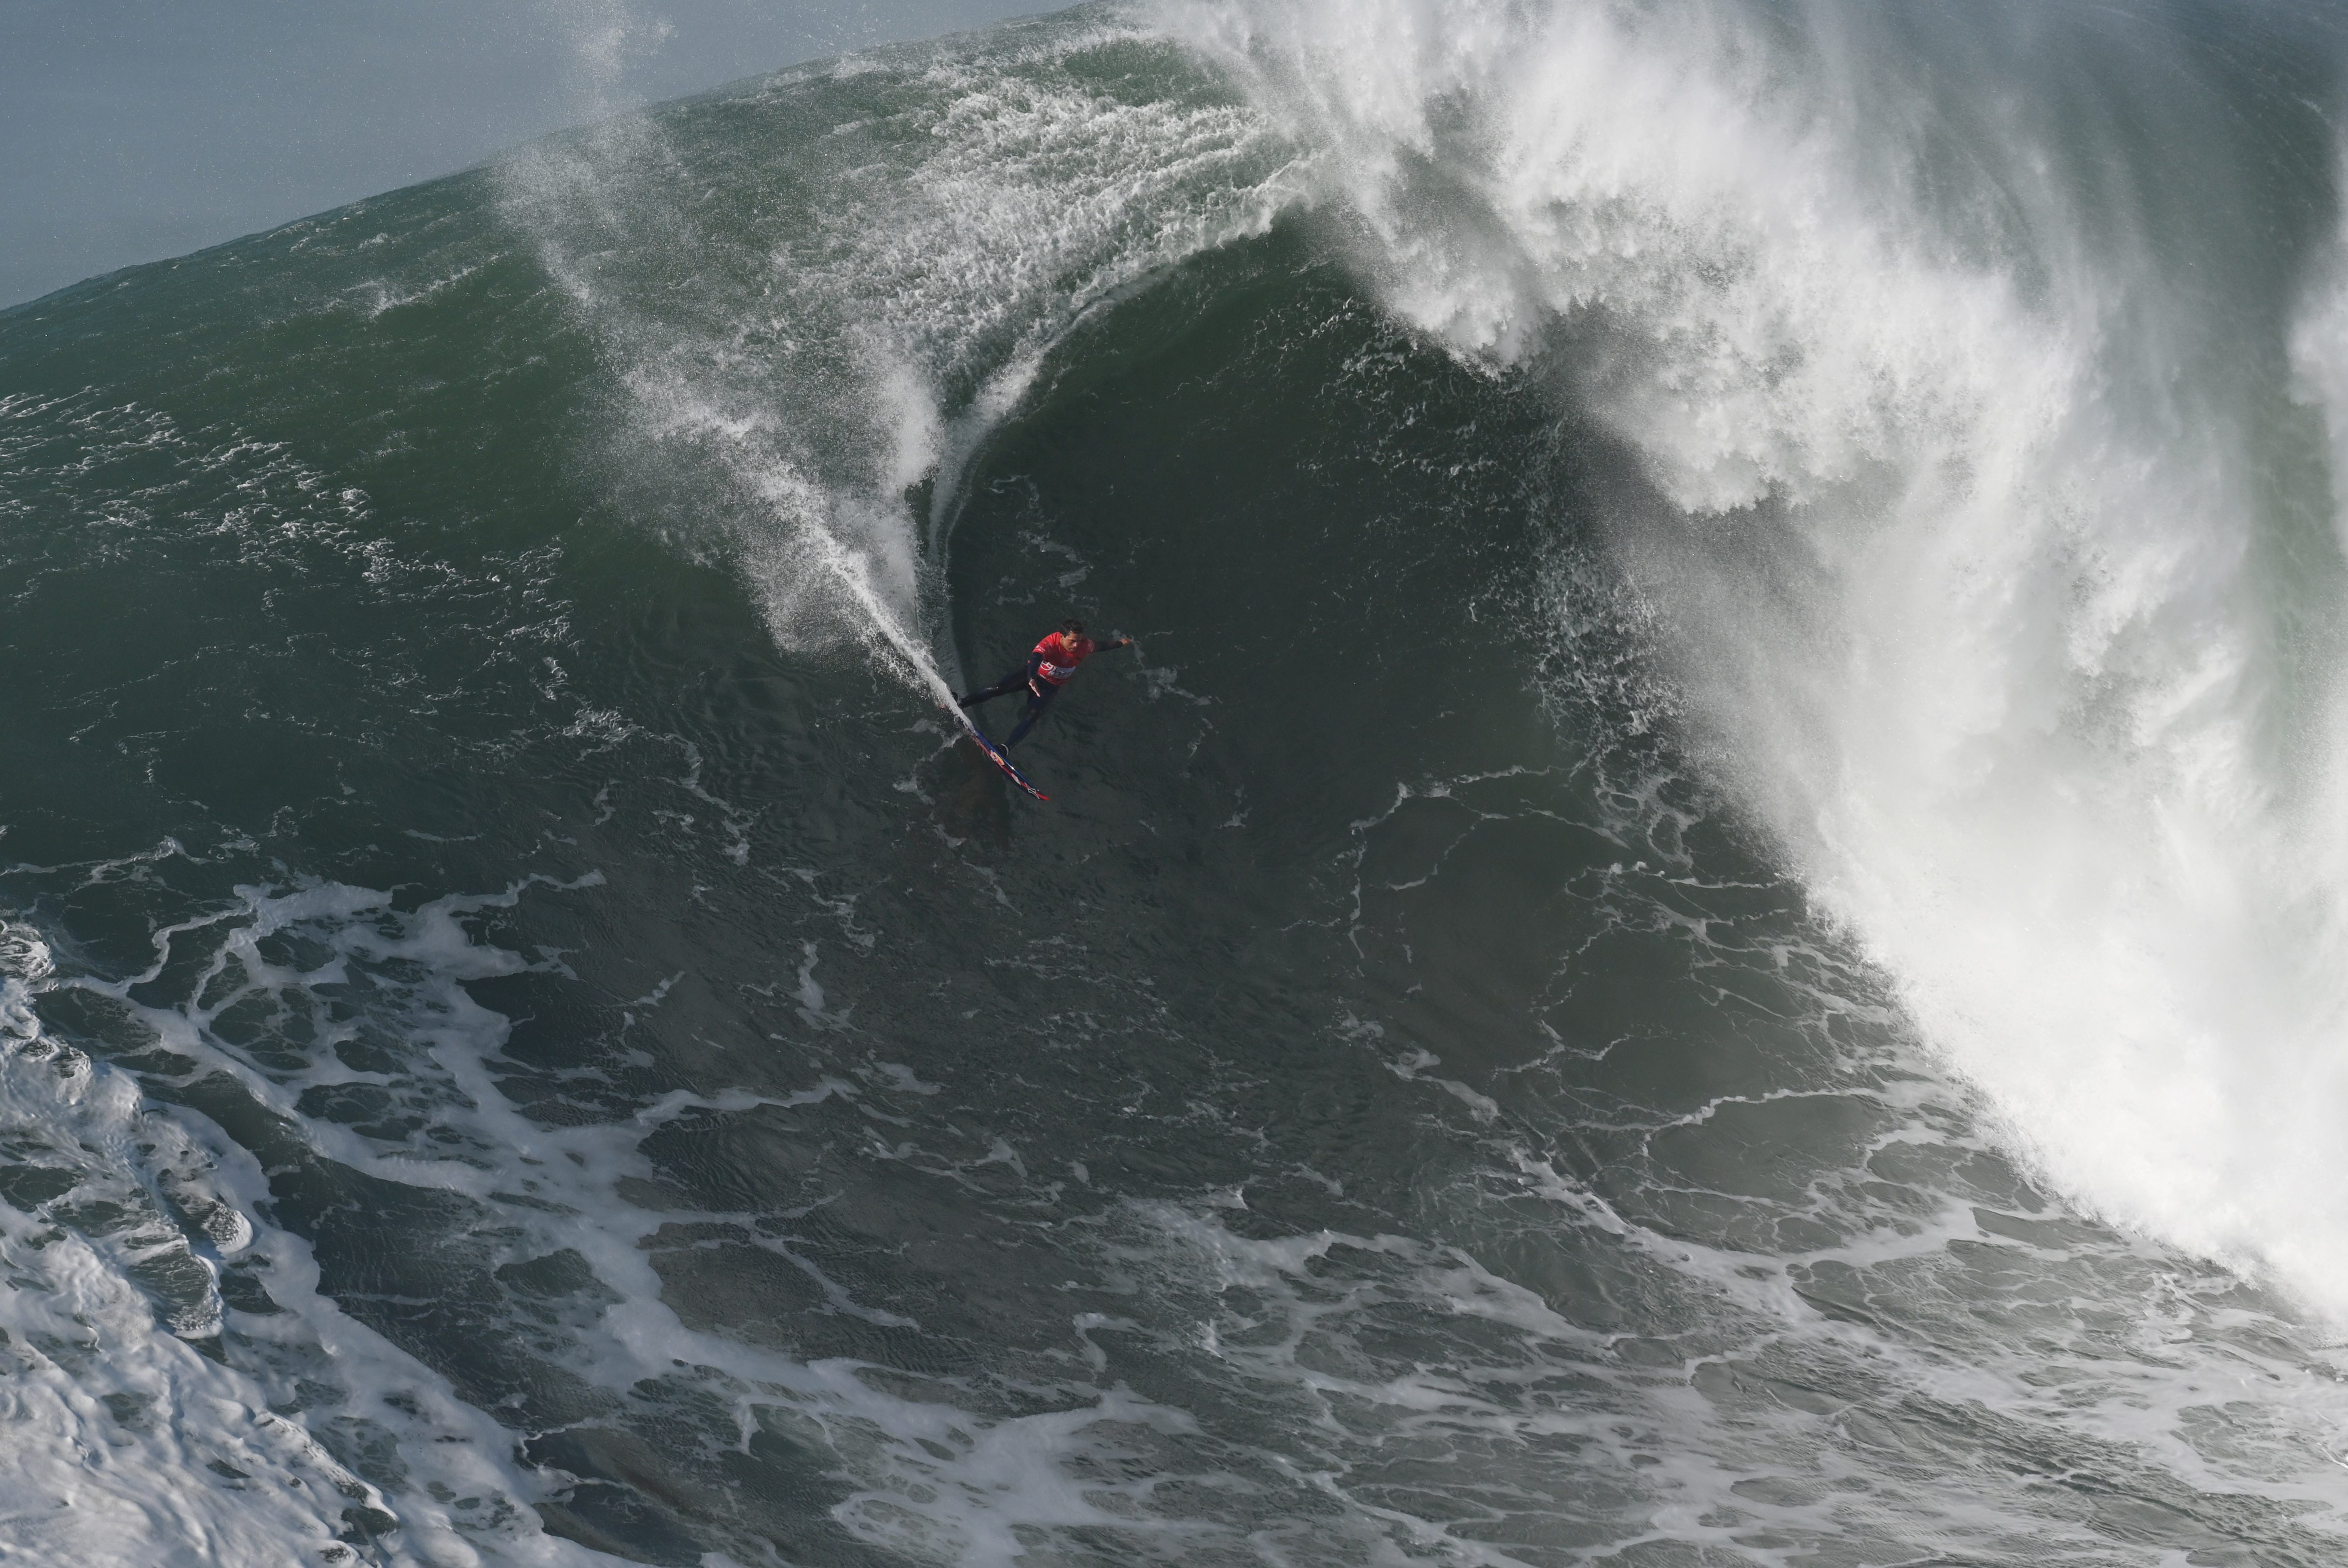 Big wave surfer Kai Lenny rides a wave in 2021 in Nazare.